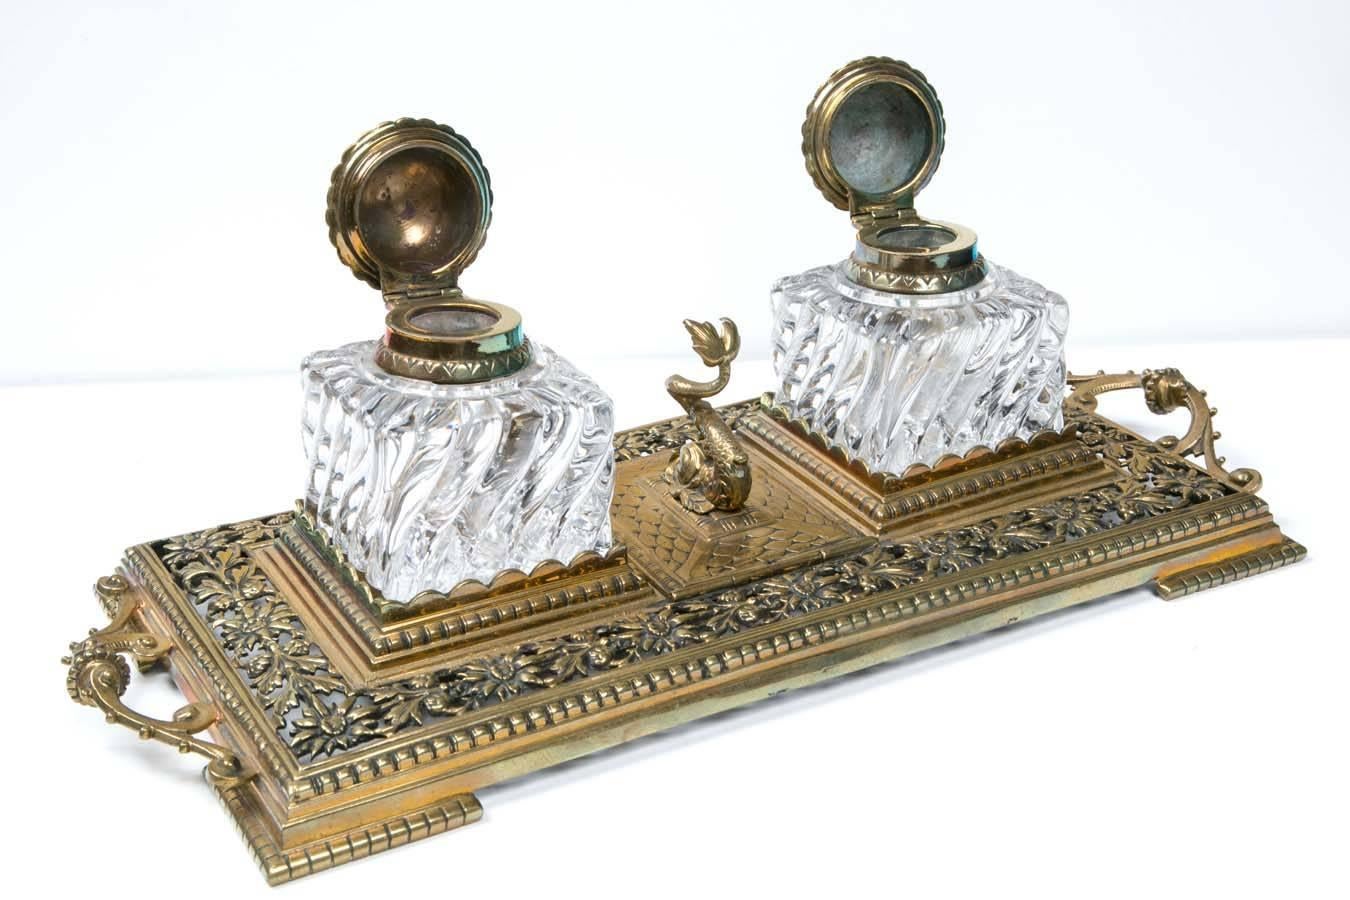 This is just one of a 350 piece collection of 18th-19th century antiques from a private collector. 19th century crystal inkwells in brass tray with sturgeon stamp holder. It has two cut-glass inkwells with brass caps on a brass tray. A beautiful